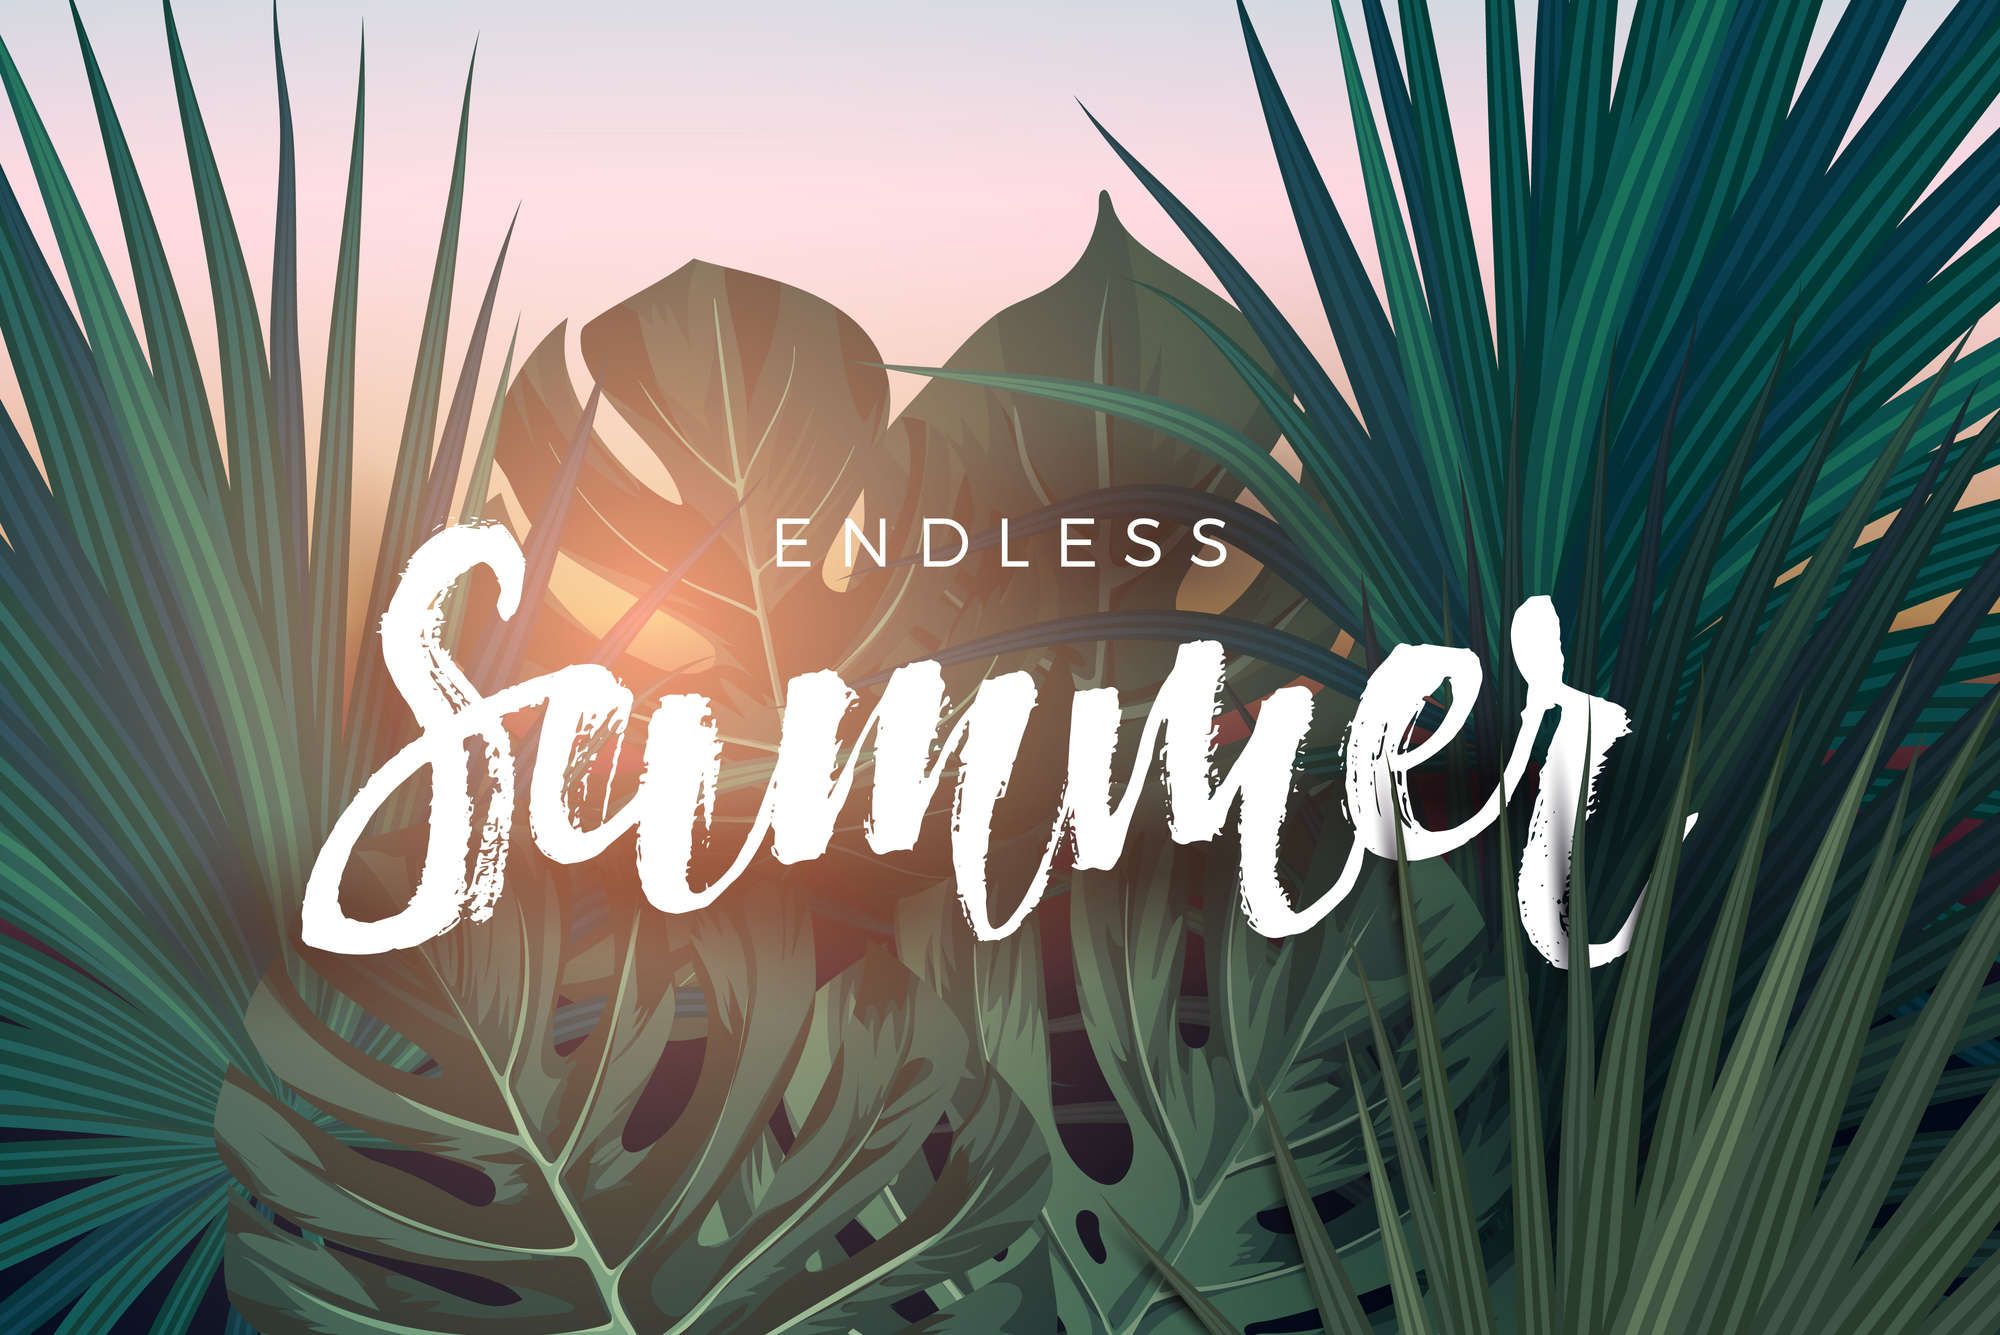             Graphic wall mural "Endless Summer" lettering on textured non-woven
        